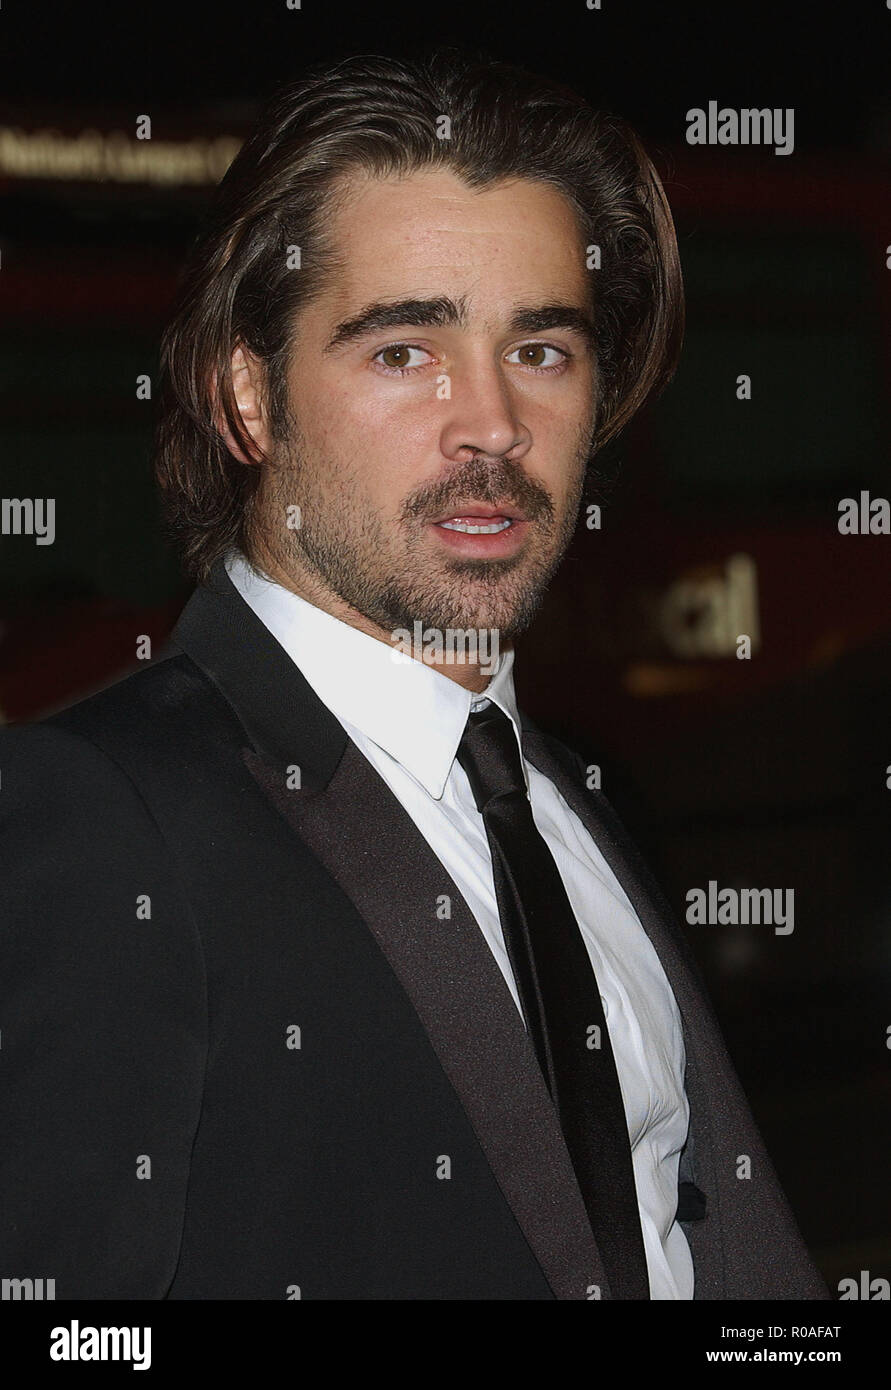 Colin Farrell arriving Alexander Premiere at the Chinese Theatre in Los Angeless. November 16, 2004.FarrellColin018A Red Carpet Event, Vertical, USA, Film Industry, Celebrities,  Photography, Bestof, Arts Culture and Entertainment, Topix Celebrities fashion /  Vertical, Best of, Event in Hollywood Life - California,  Red Carpet and backstage, USA, Film Industry, Celebrities,  movie celebrities, TV celebrities, Music celebrities, Photography, Bestof, Arts Culture and Entertainment,  Topix, headshot, vertical, one person,, from the year , 2004, inquiry tsuni@Gamma-USA.com Stock Photo